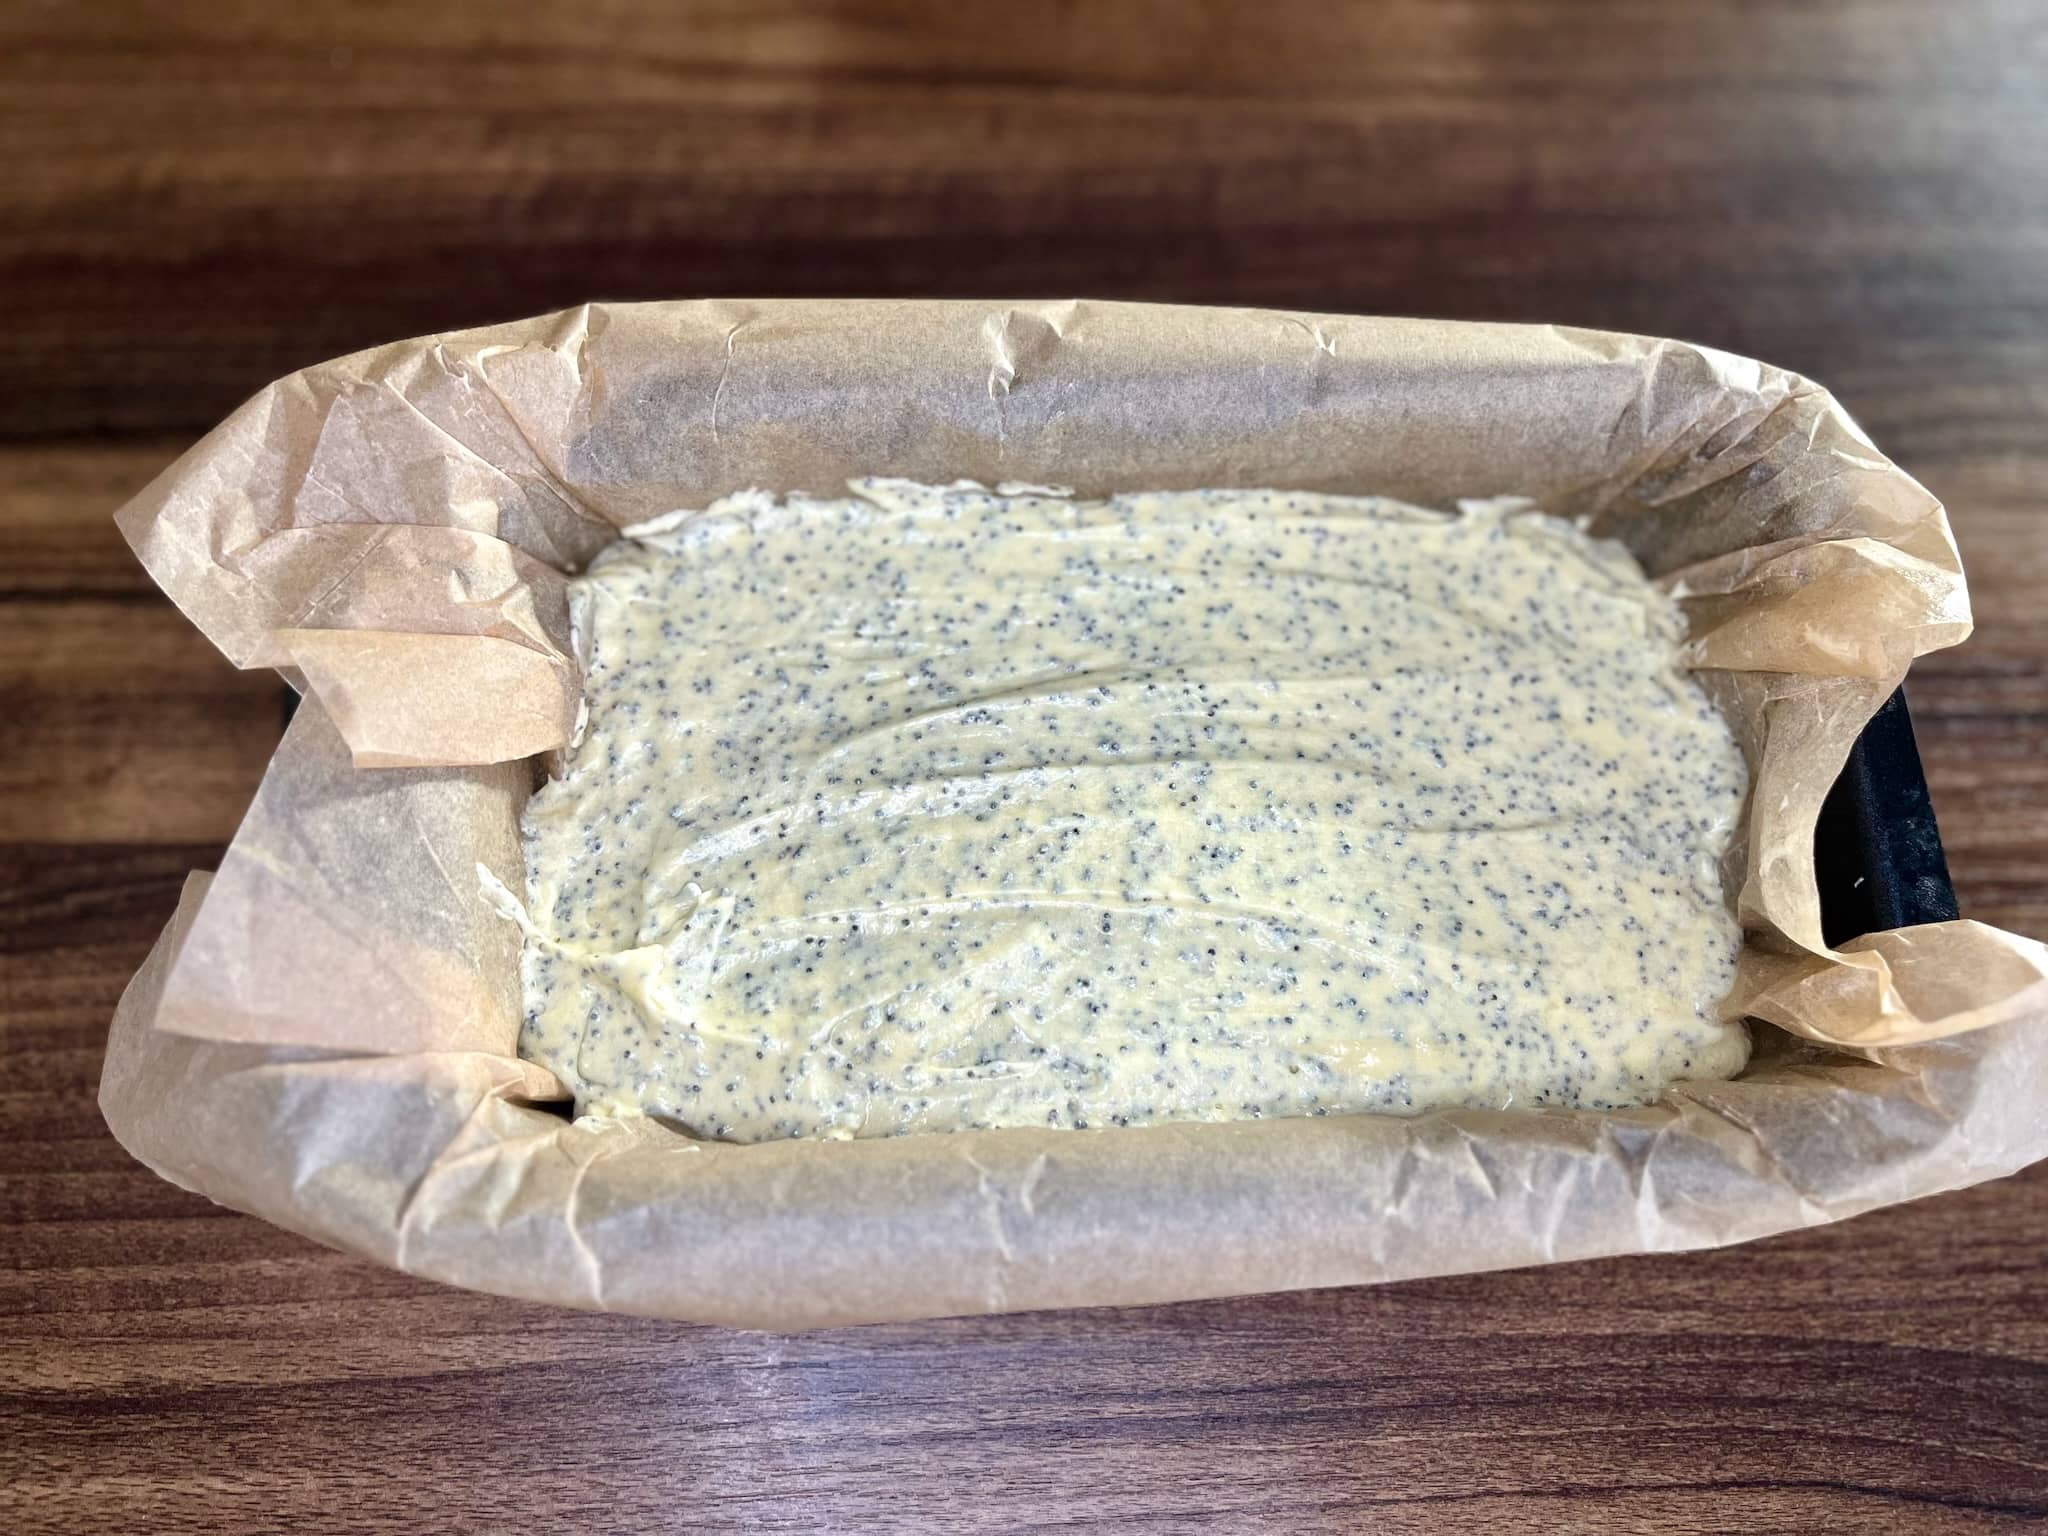 The poppy seed loaf cake dough was transferred to a loaf pan.